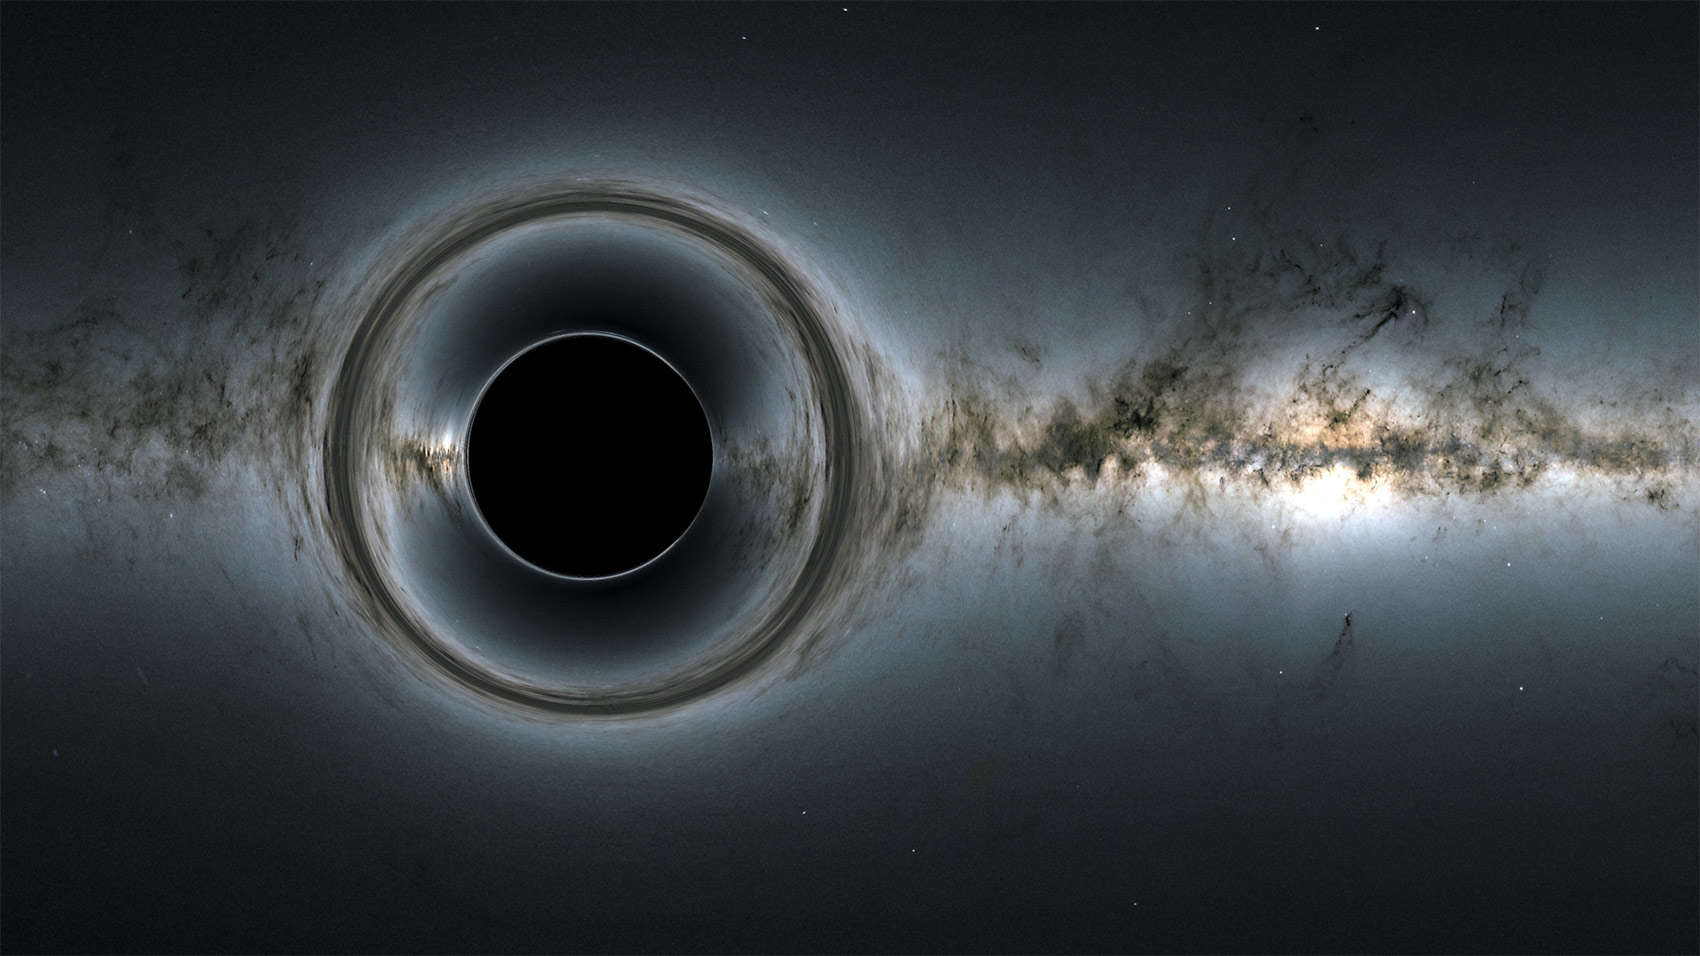 A simulated image shows what happens when a black hole’s gravity distorts the light from stars behind it. Credit: NASA